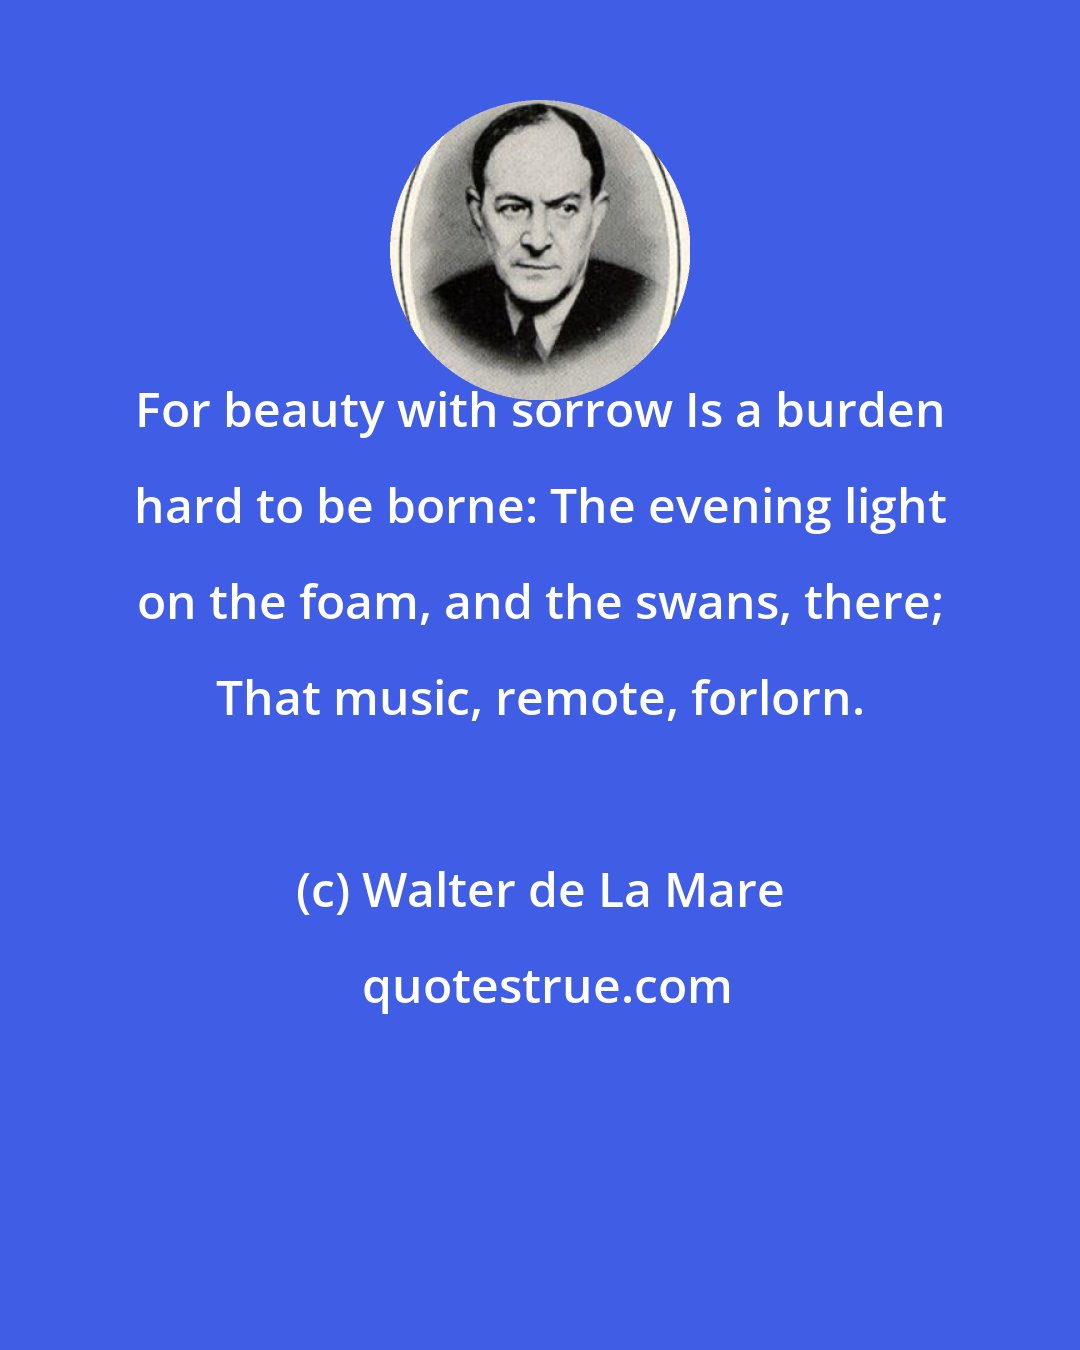 Walter de La Mare: For beauty with sorrow Is a burden hard to be borne: The evening light on the foam, and the swans, there; That music, remote, forlorn.